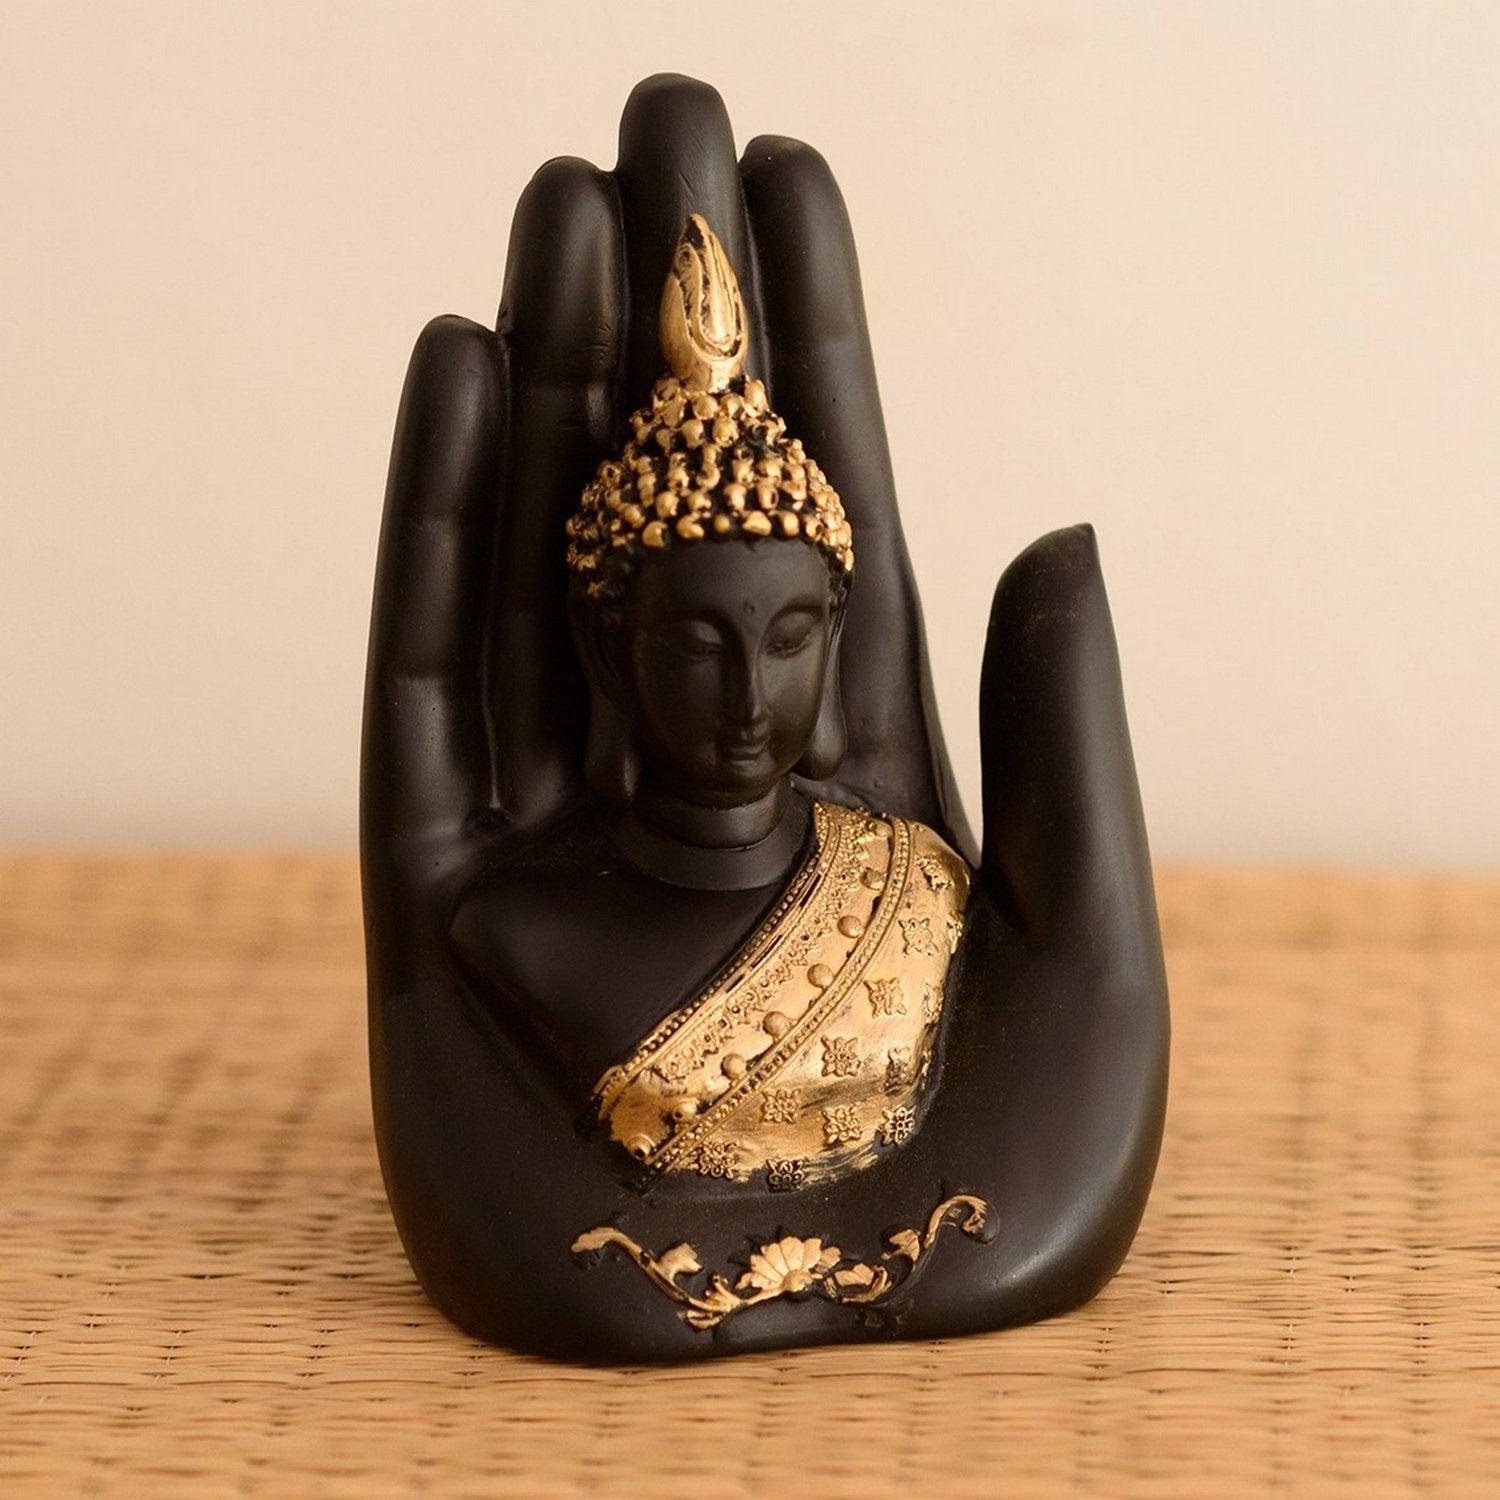 Golden & Black Polyresin Handcrafted Palm Buddha Statue Showpiece For Decoration - Walgrow.com